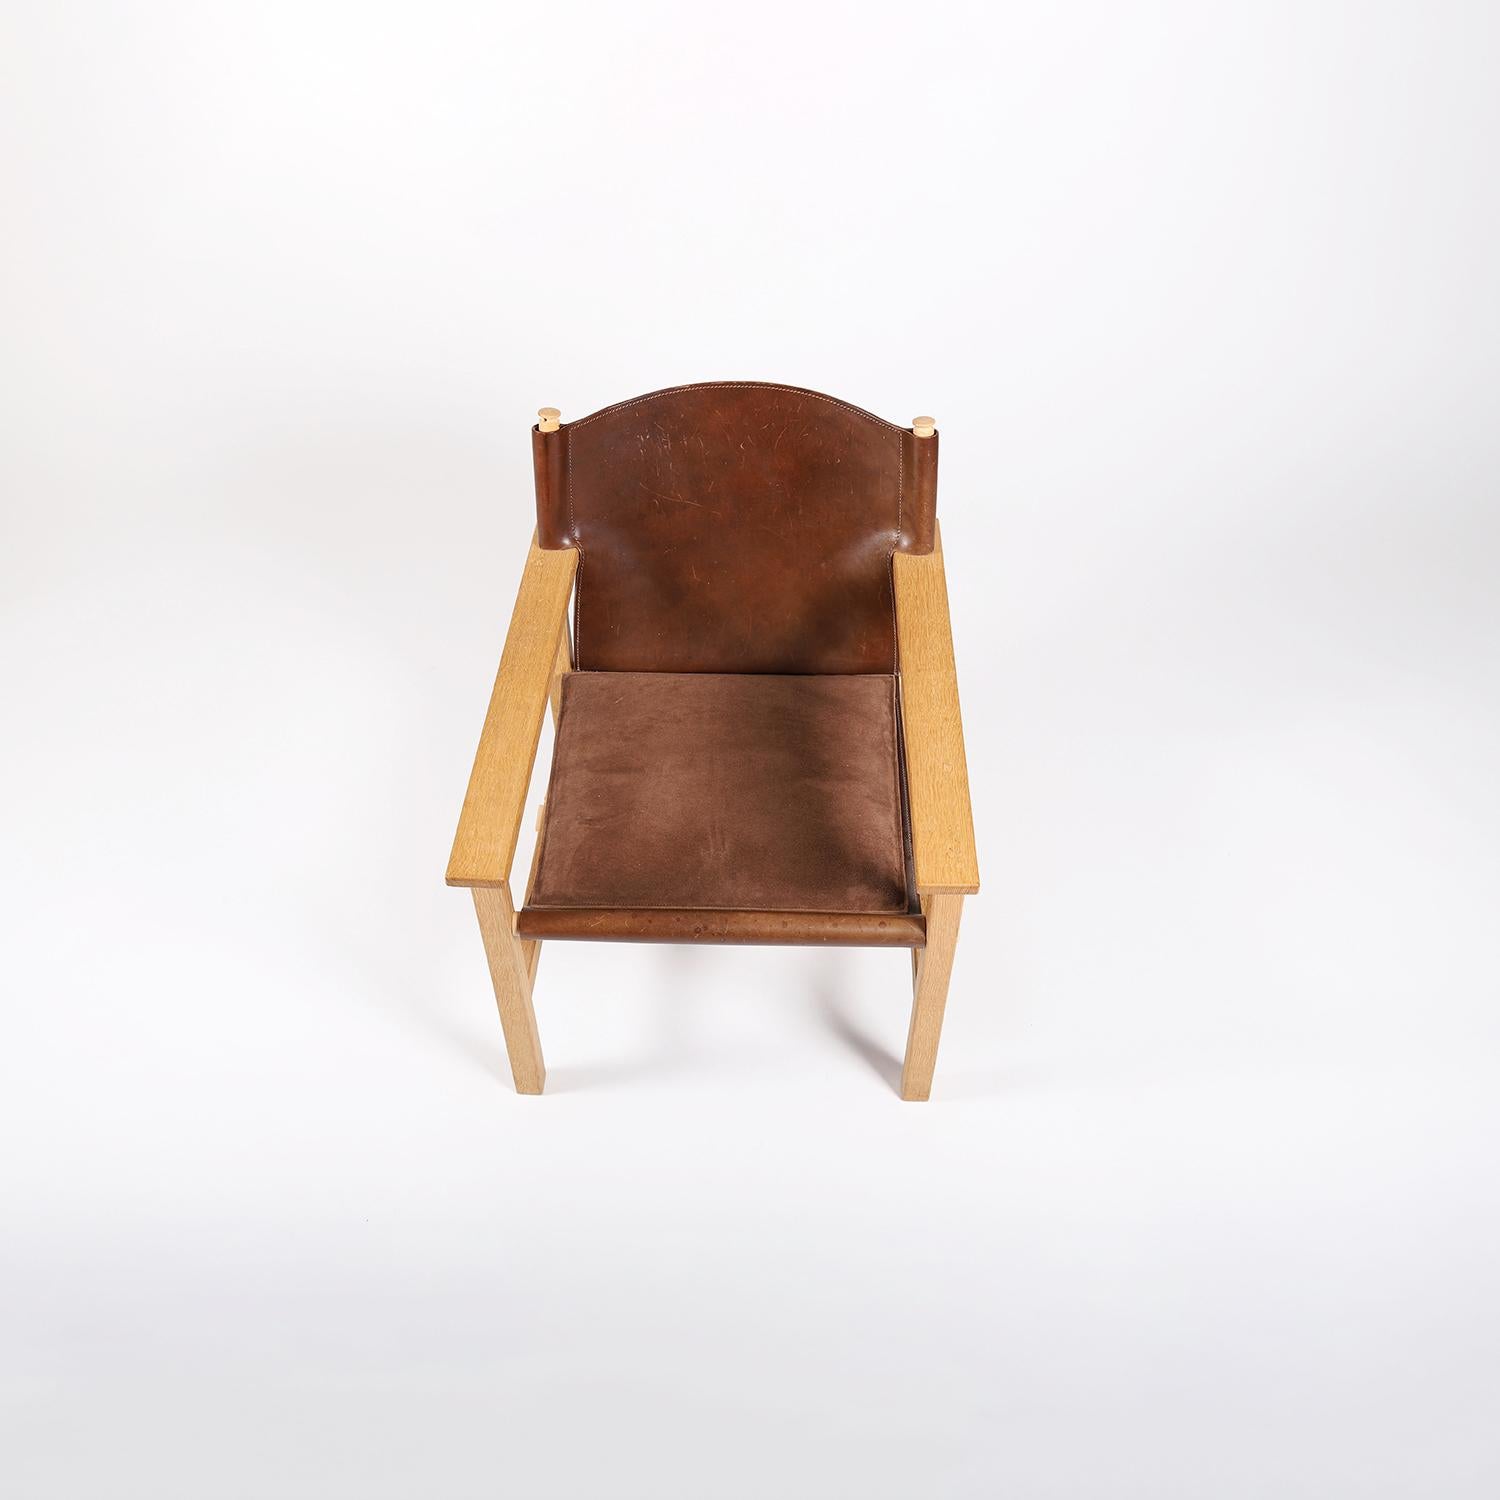 The Ferdinand chair reinvigorates a classic design to create a modern icon that is inspired by elements found in the furniture of ancient Greece. Named after the protagonist in the famous children's storybook, Ferdinand the Bull, this wooden